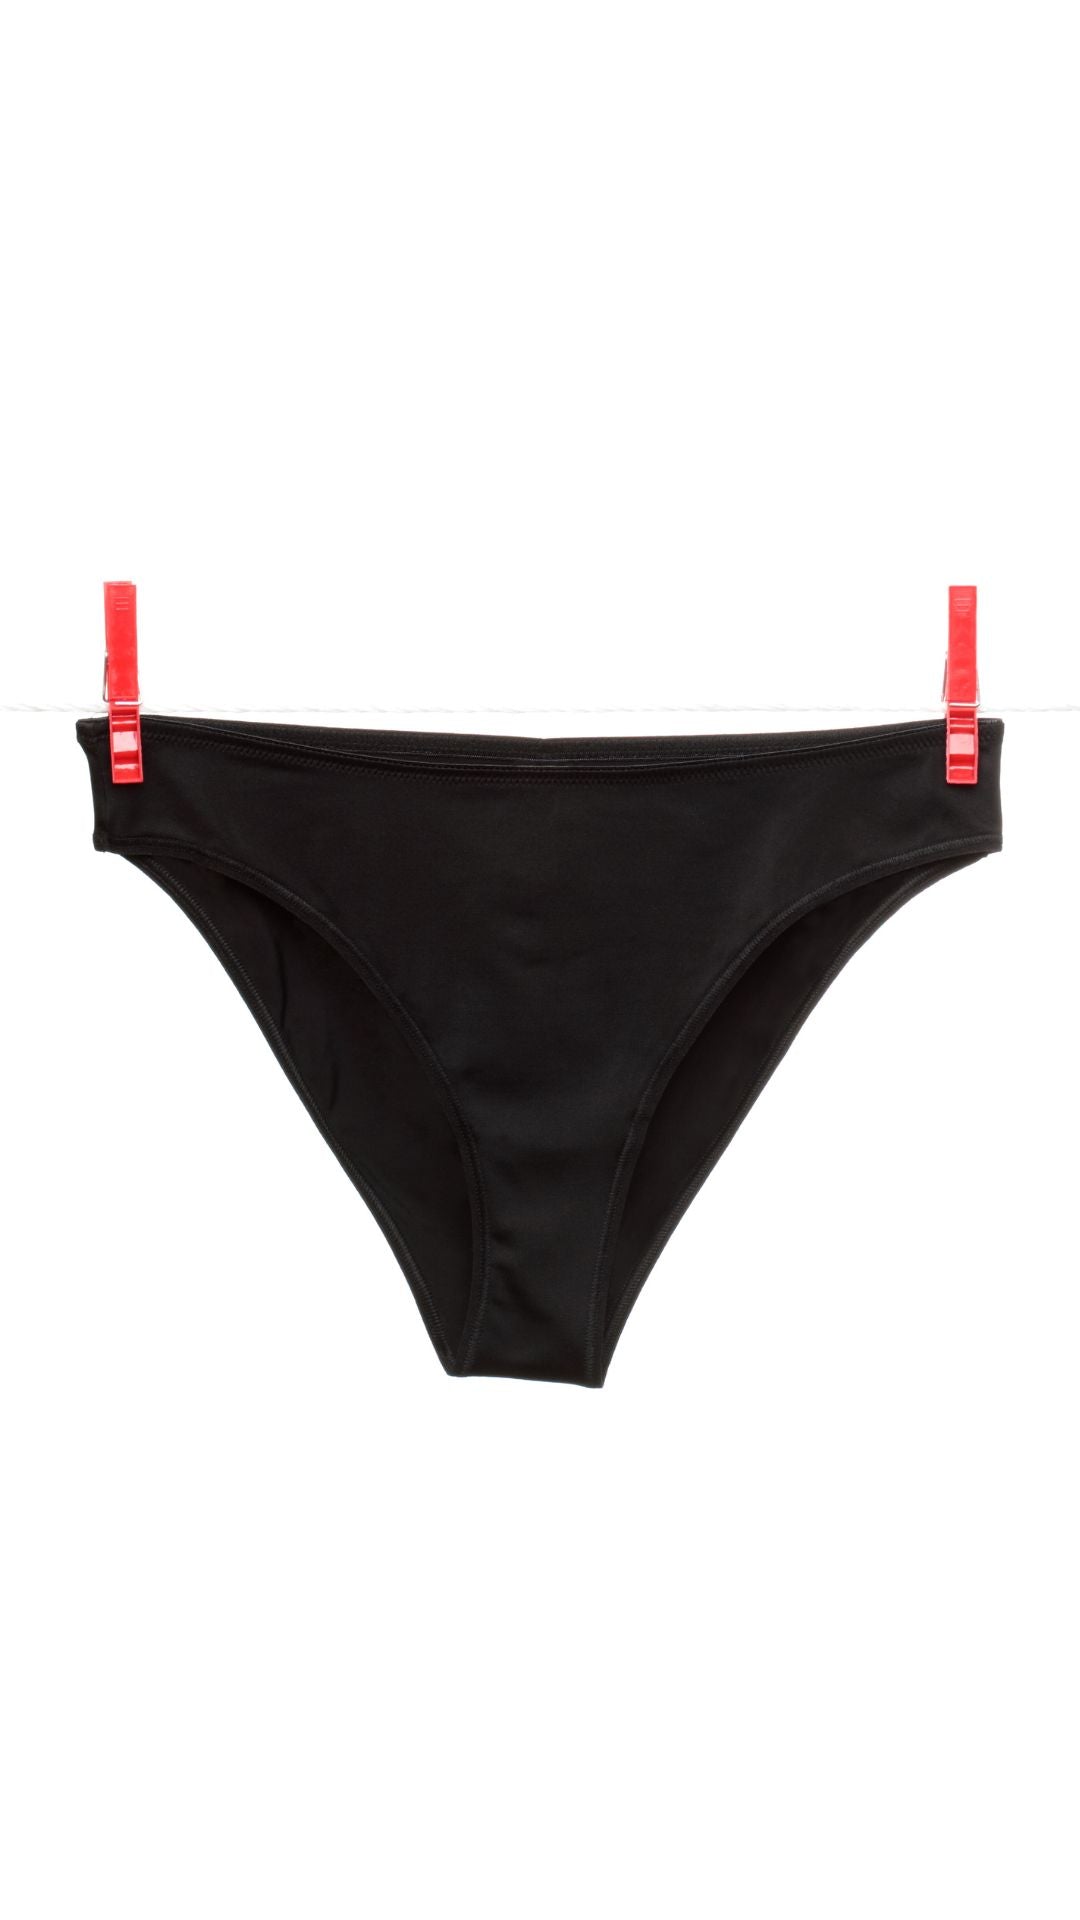 5 Reasons to Ditch Cotton for Bamboo Underwear